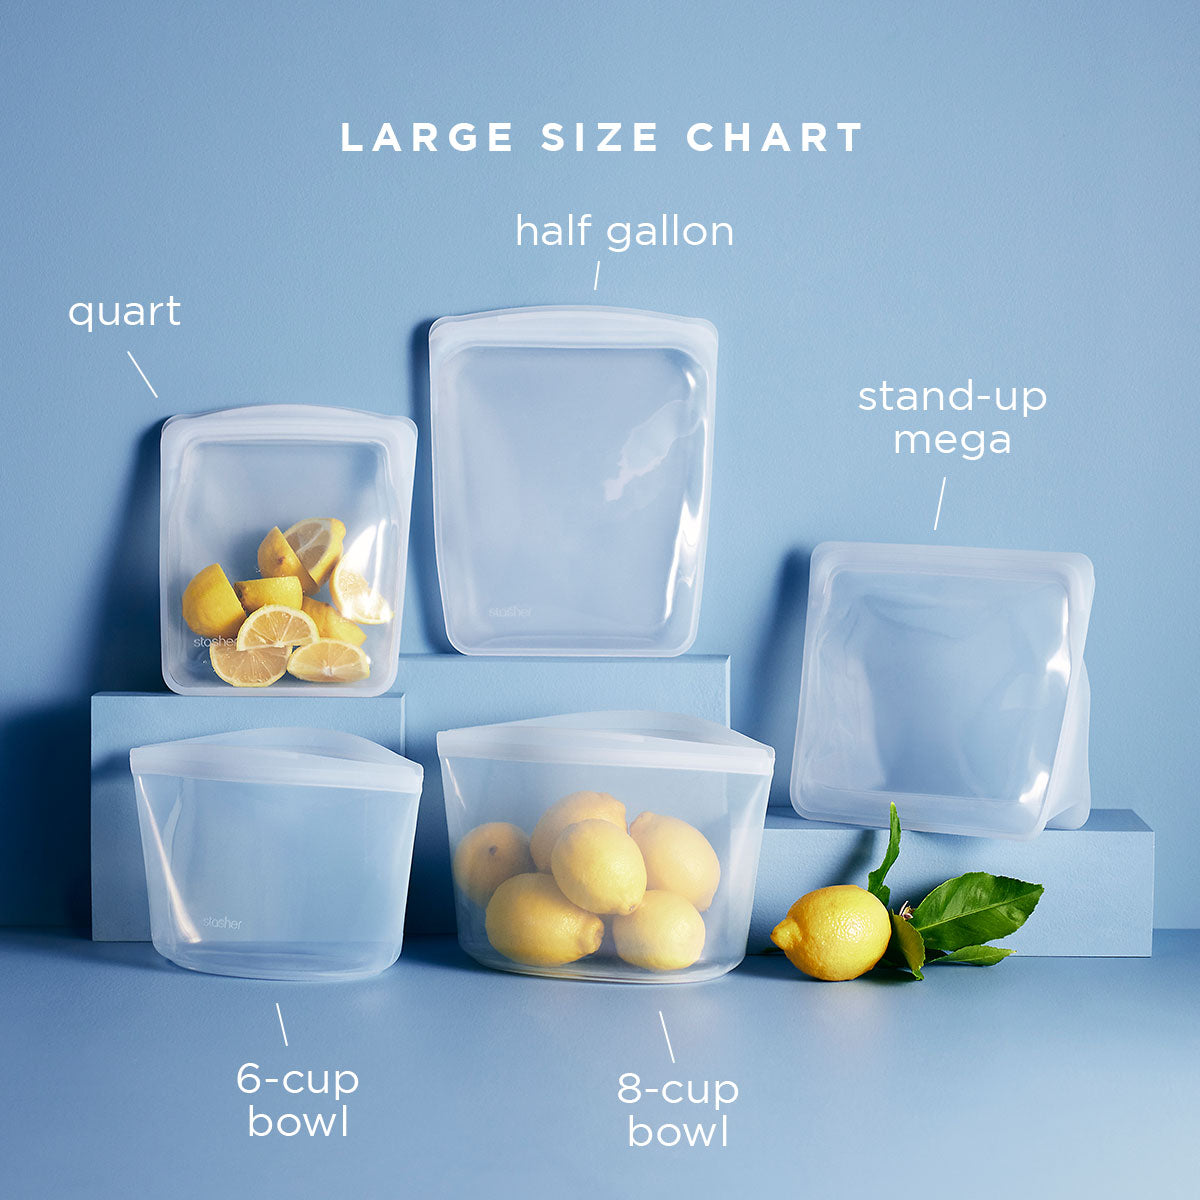 Silicone Storage Bag Food Storage Containers Reusable Silicone Food Storage  Bags Stand Up Zip Shut Bag Cup Fresh Bag